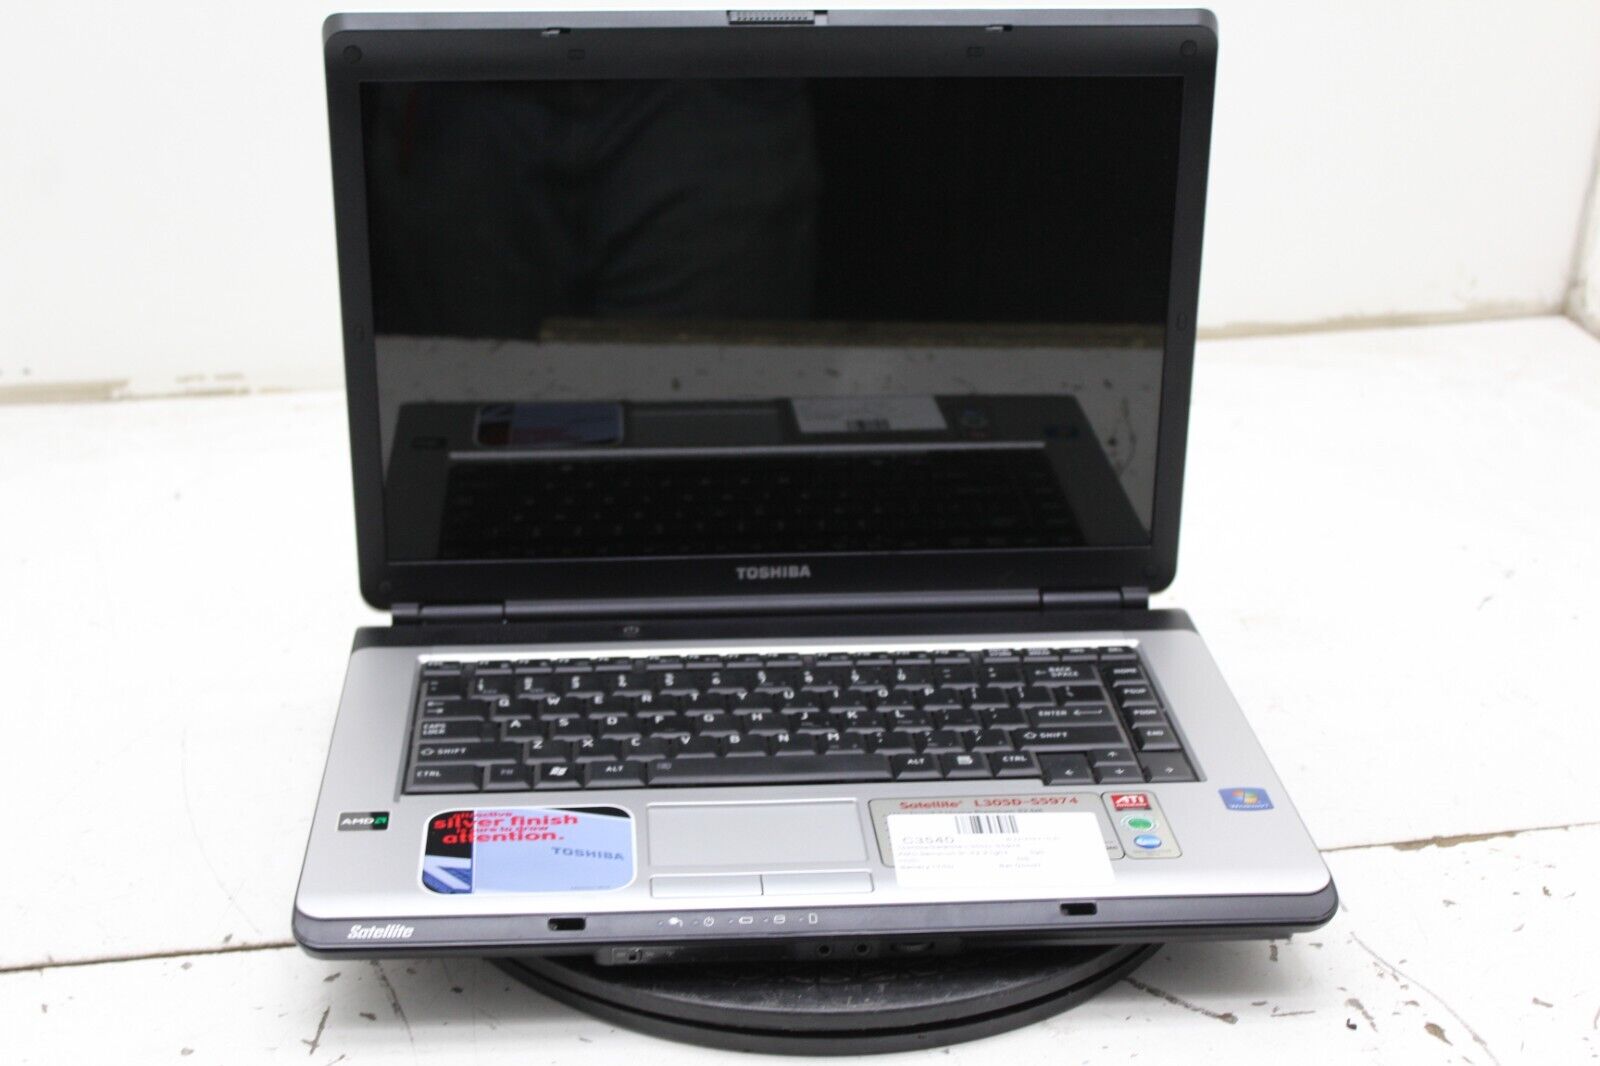 Toshiba Satellite L305D-S5974 Laptop AMD Sempron 3GB Ram No HDD or Battery